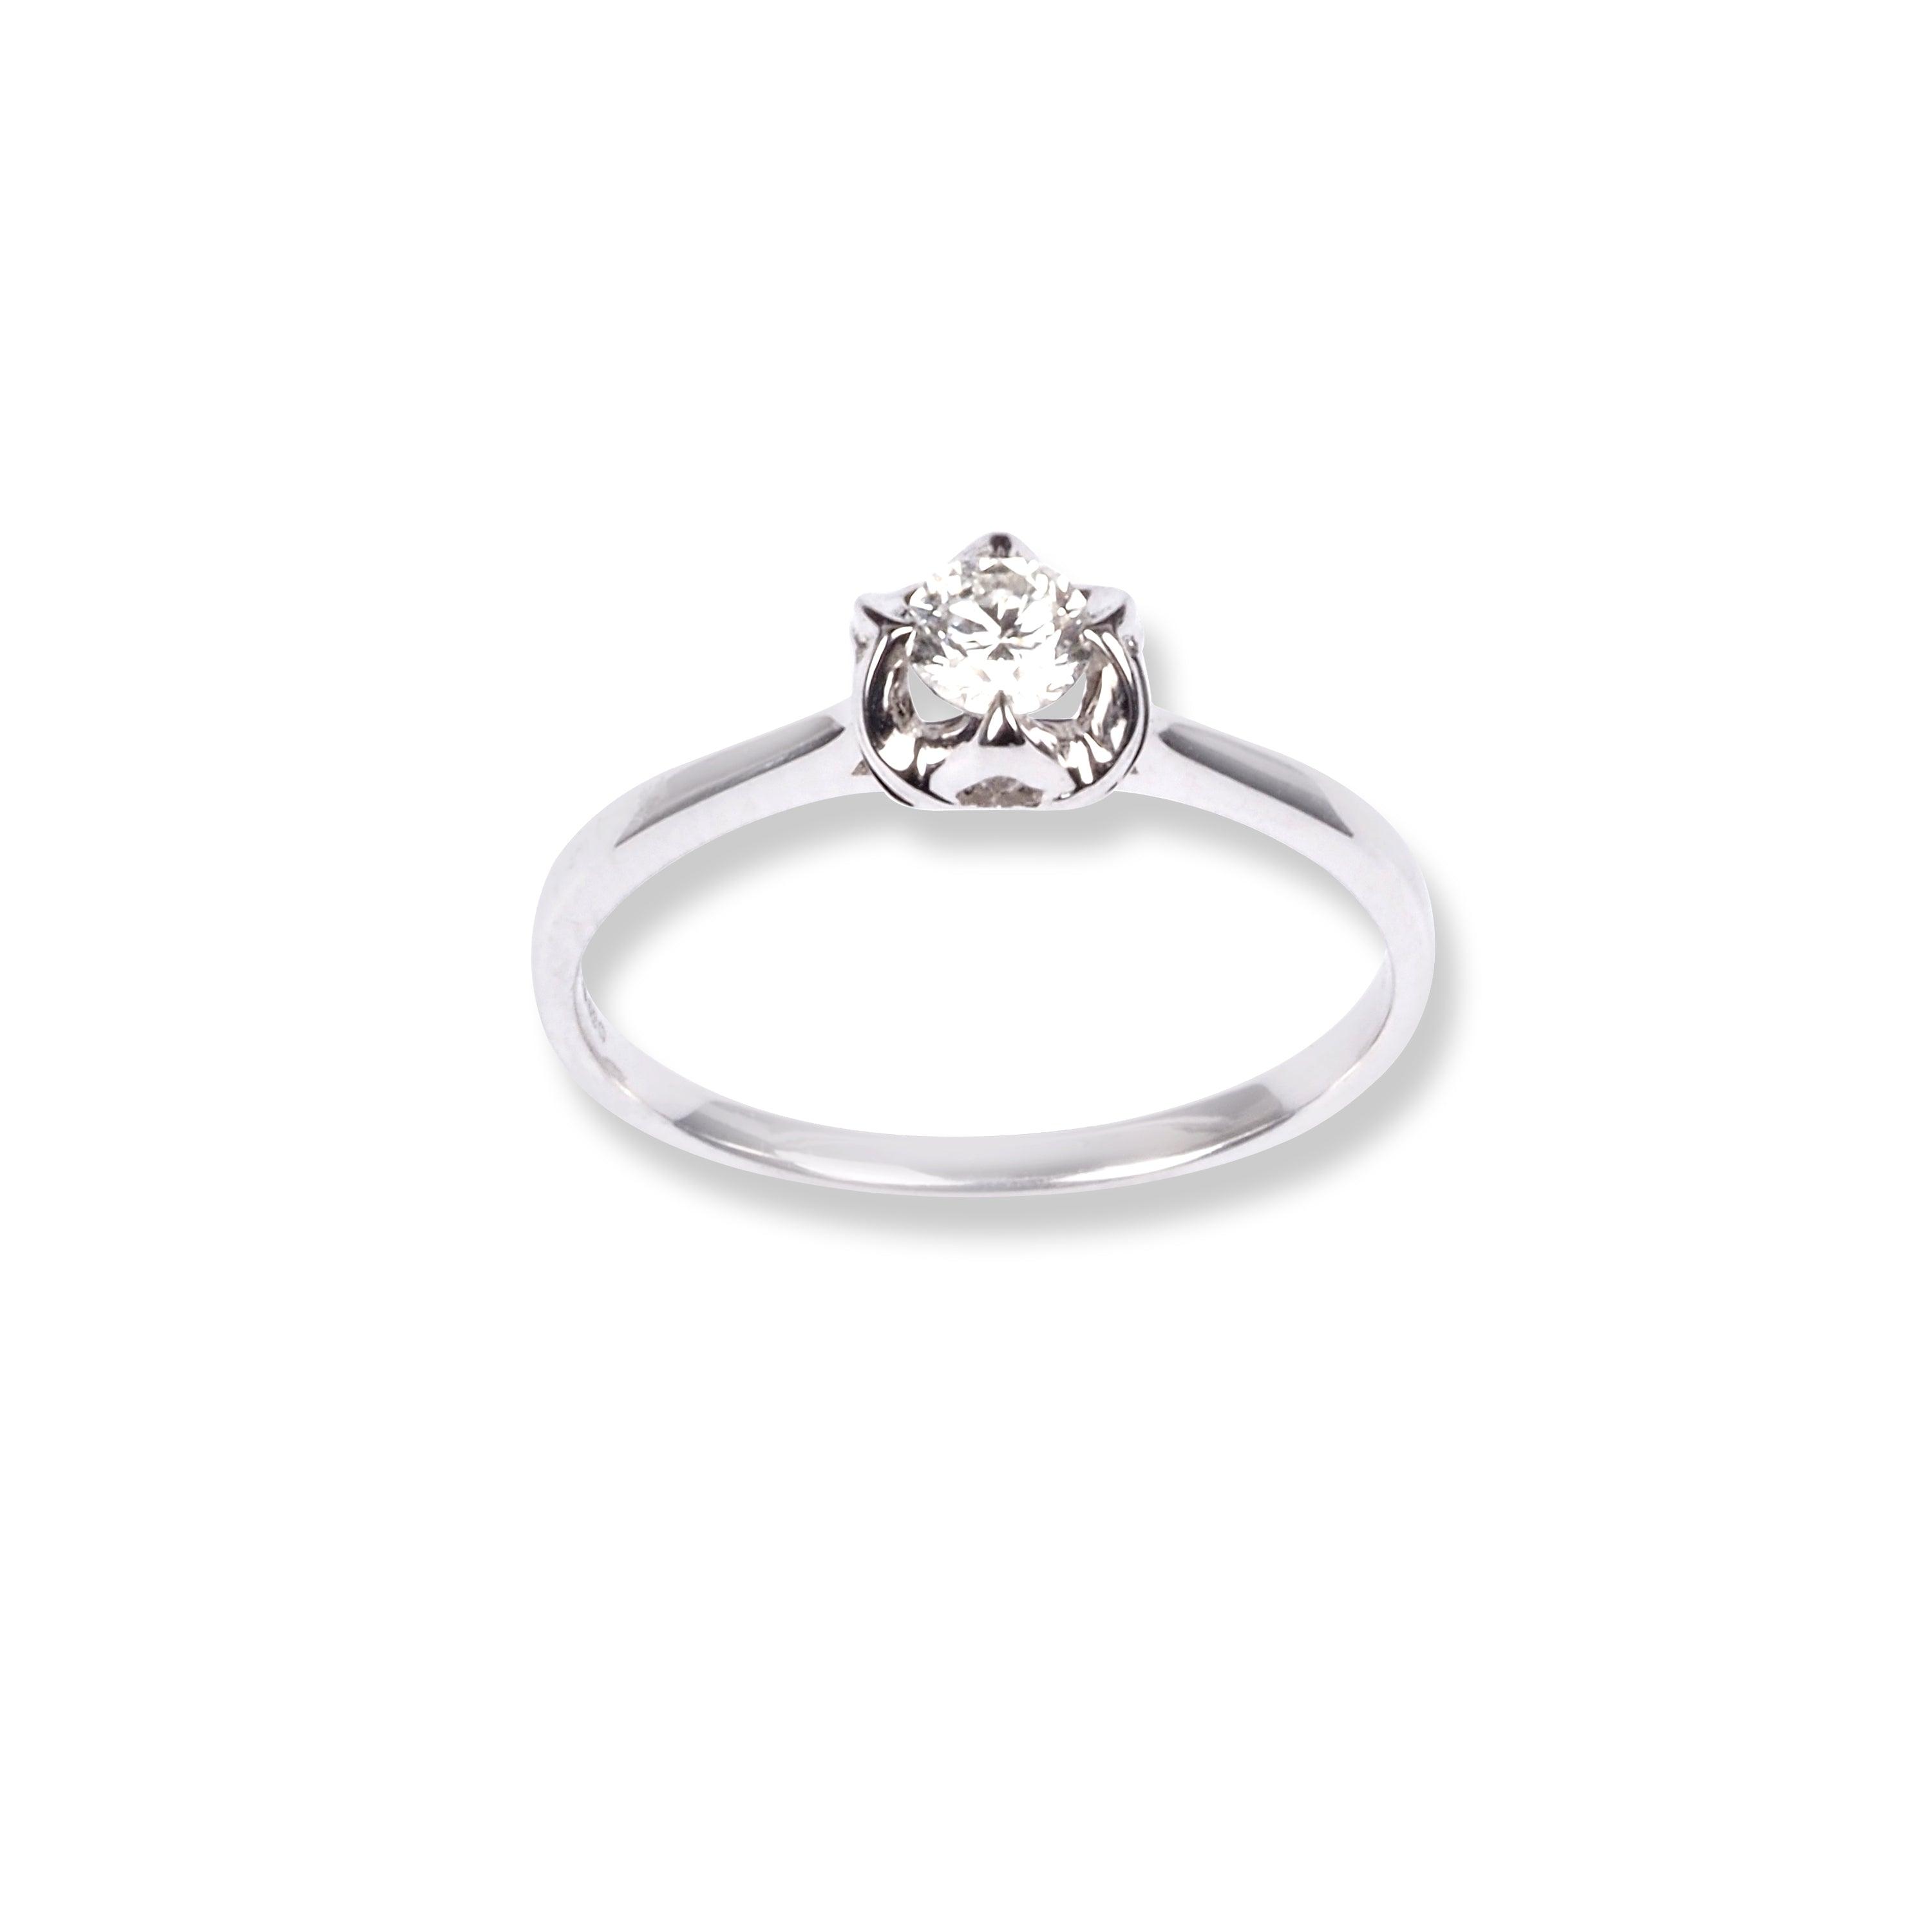 18ct White Gold Diamond Engagement Ring KCLWR052300 - Minar Jewellers